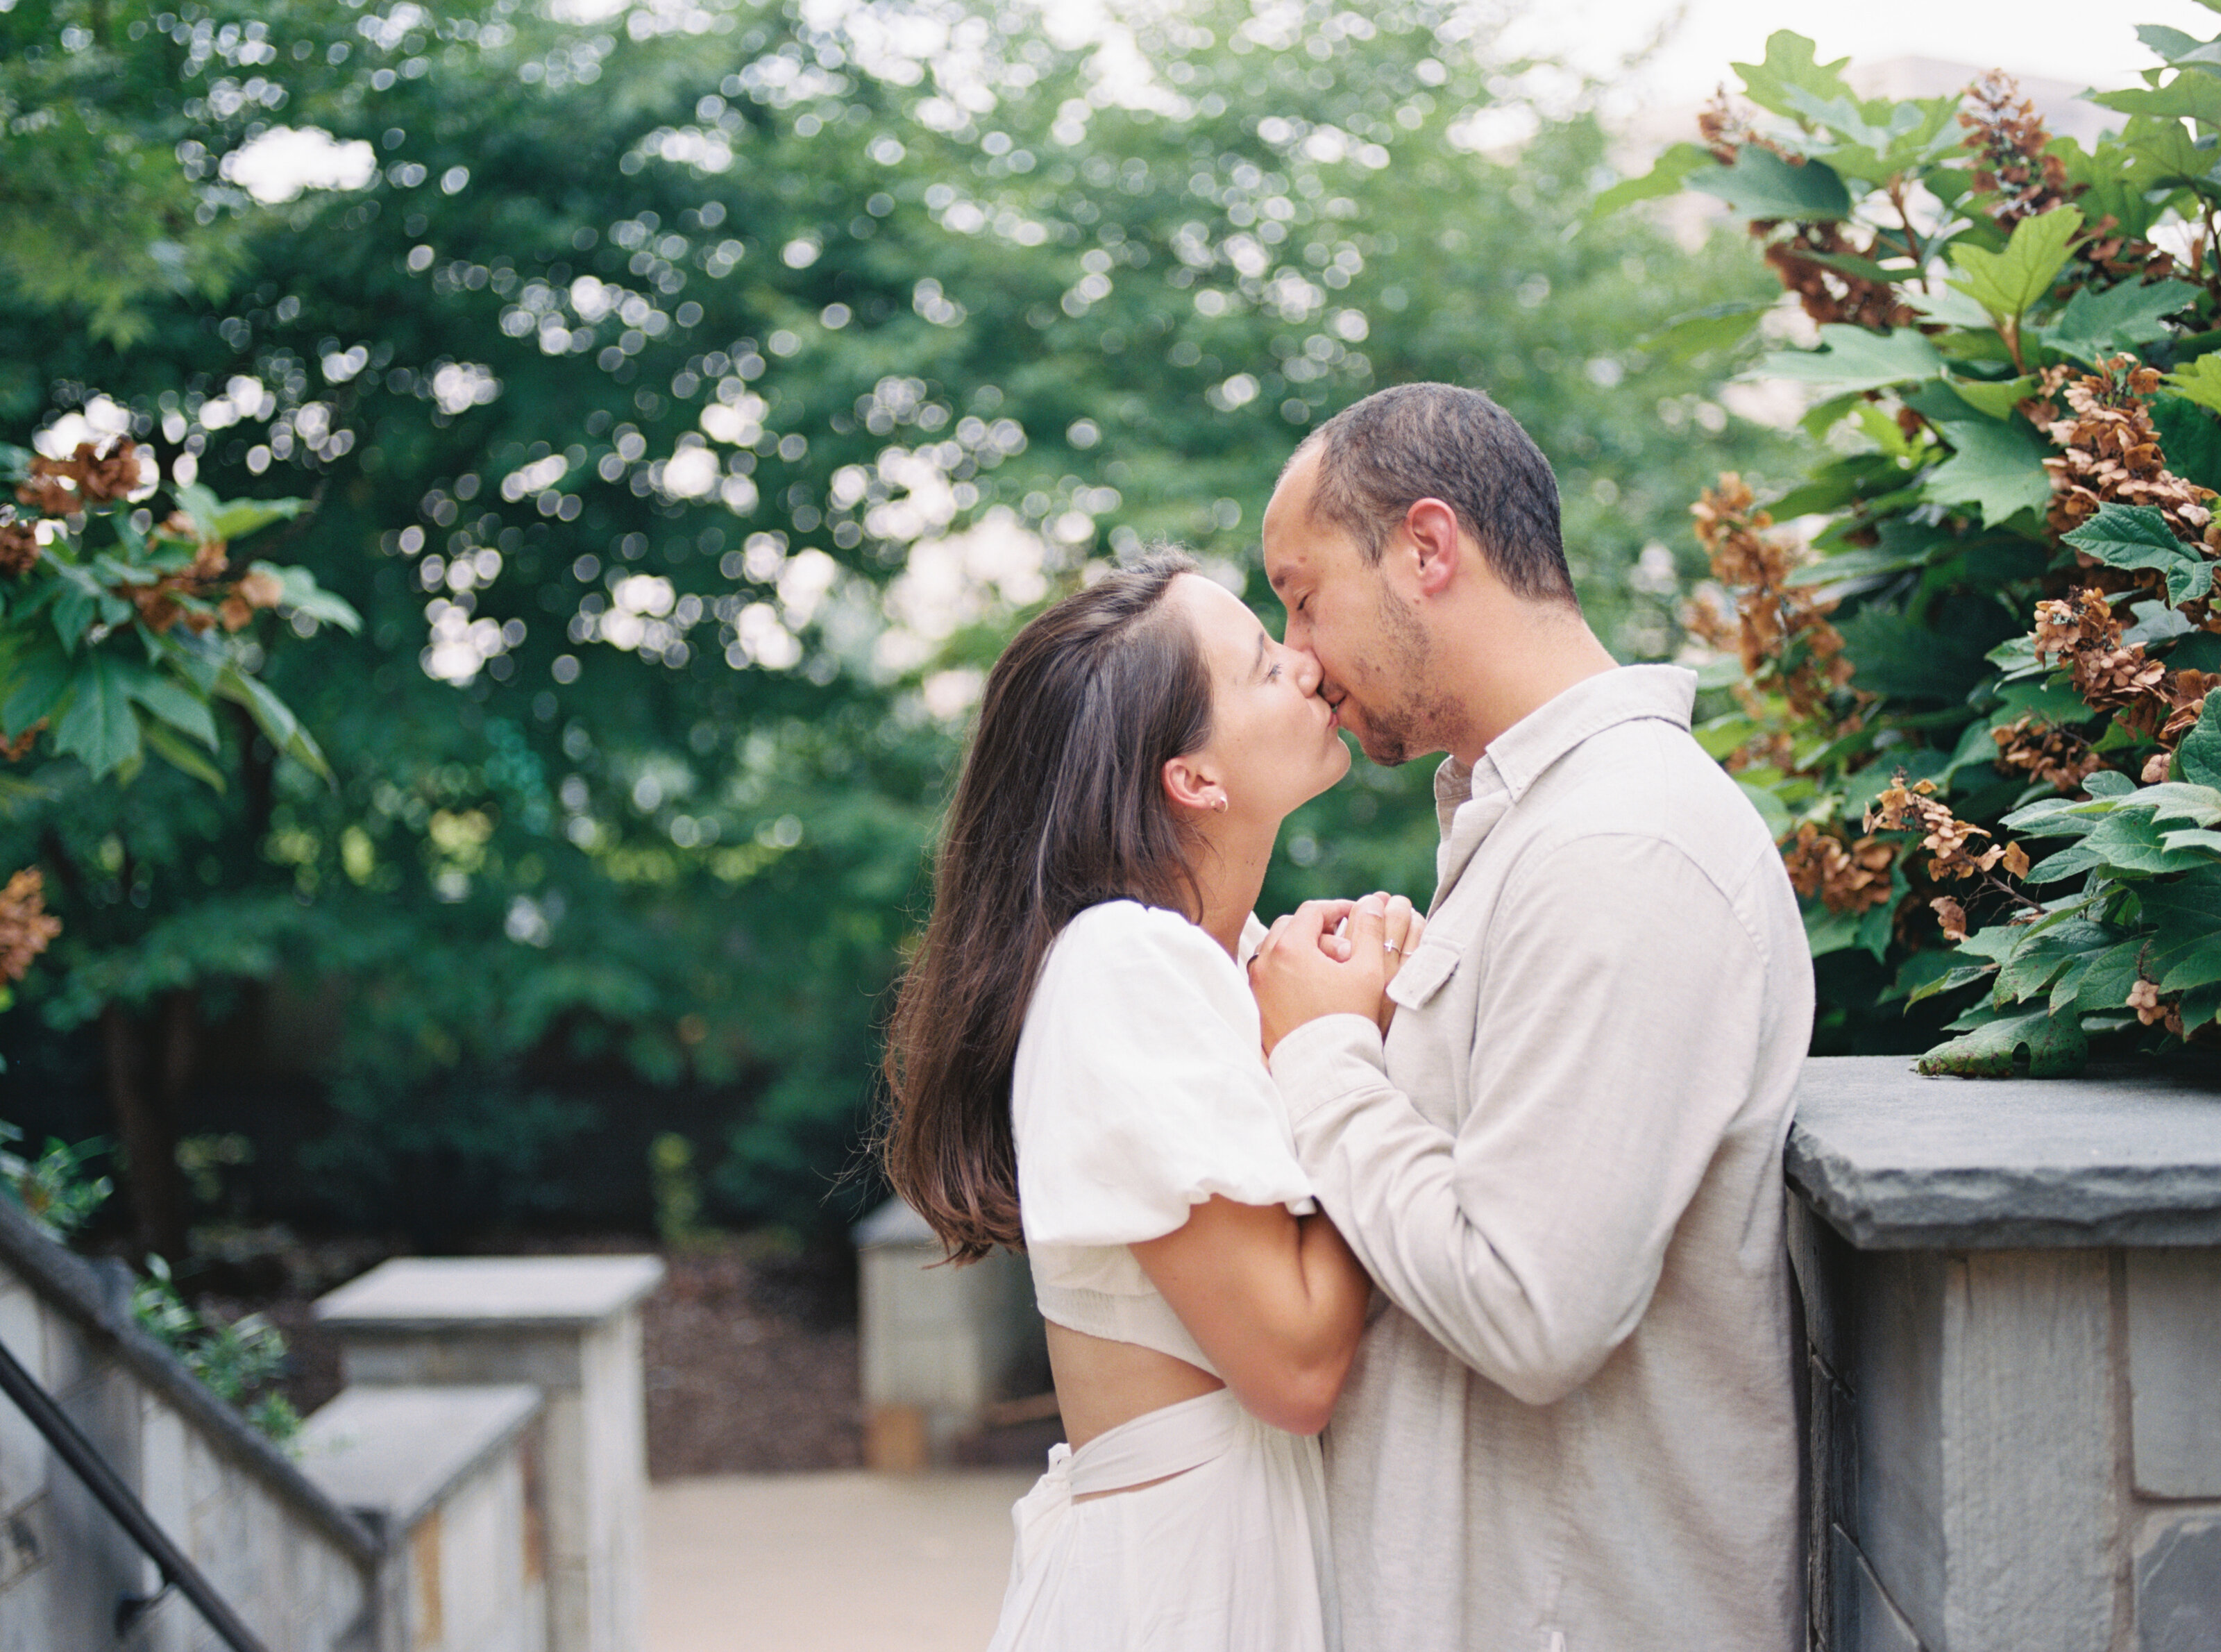 10 Best Poses for Engagement Photos - Wine and Country Weddings